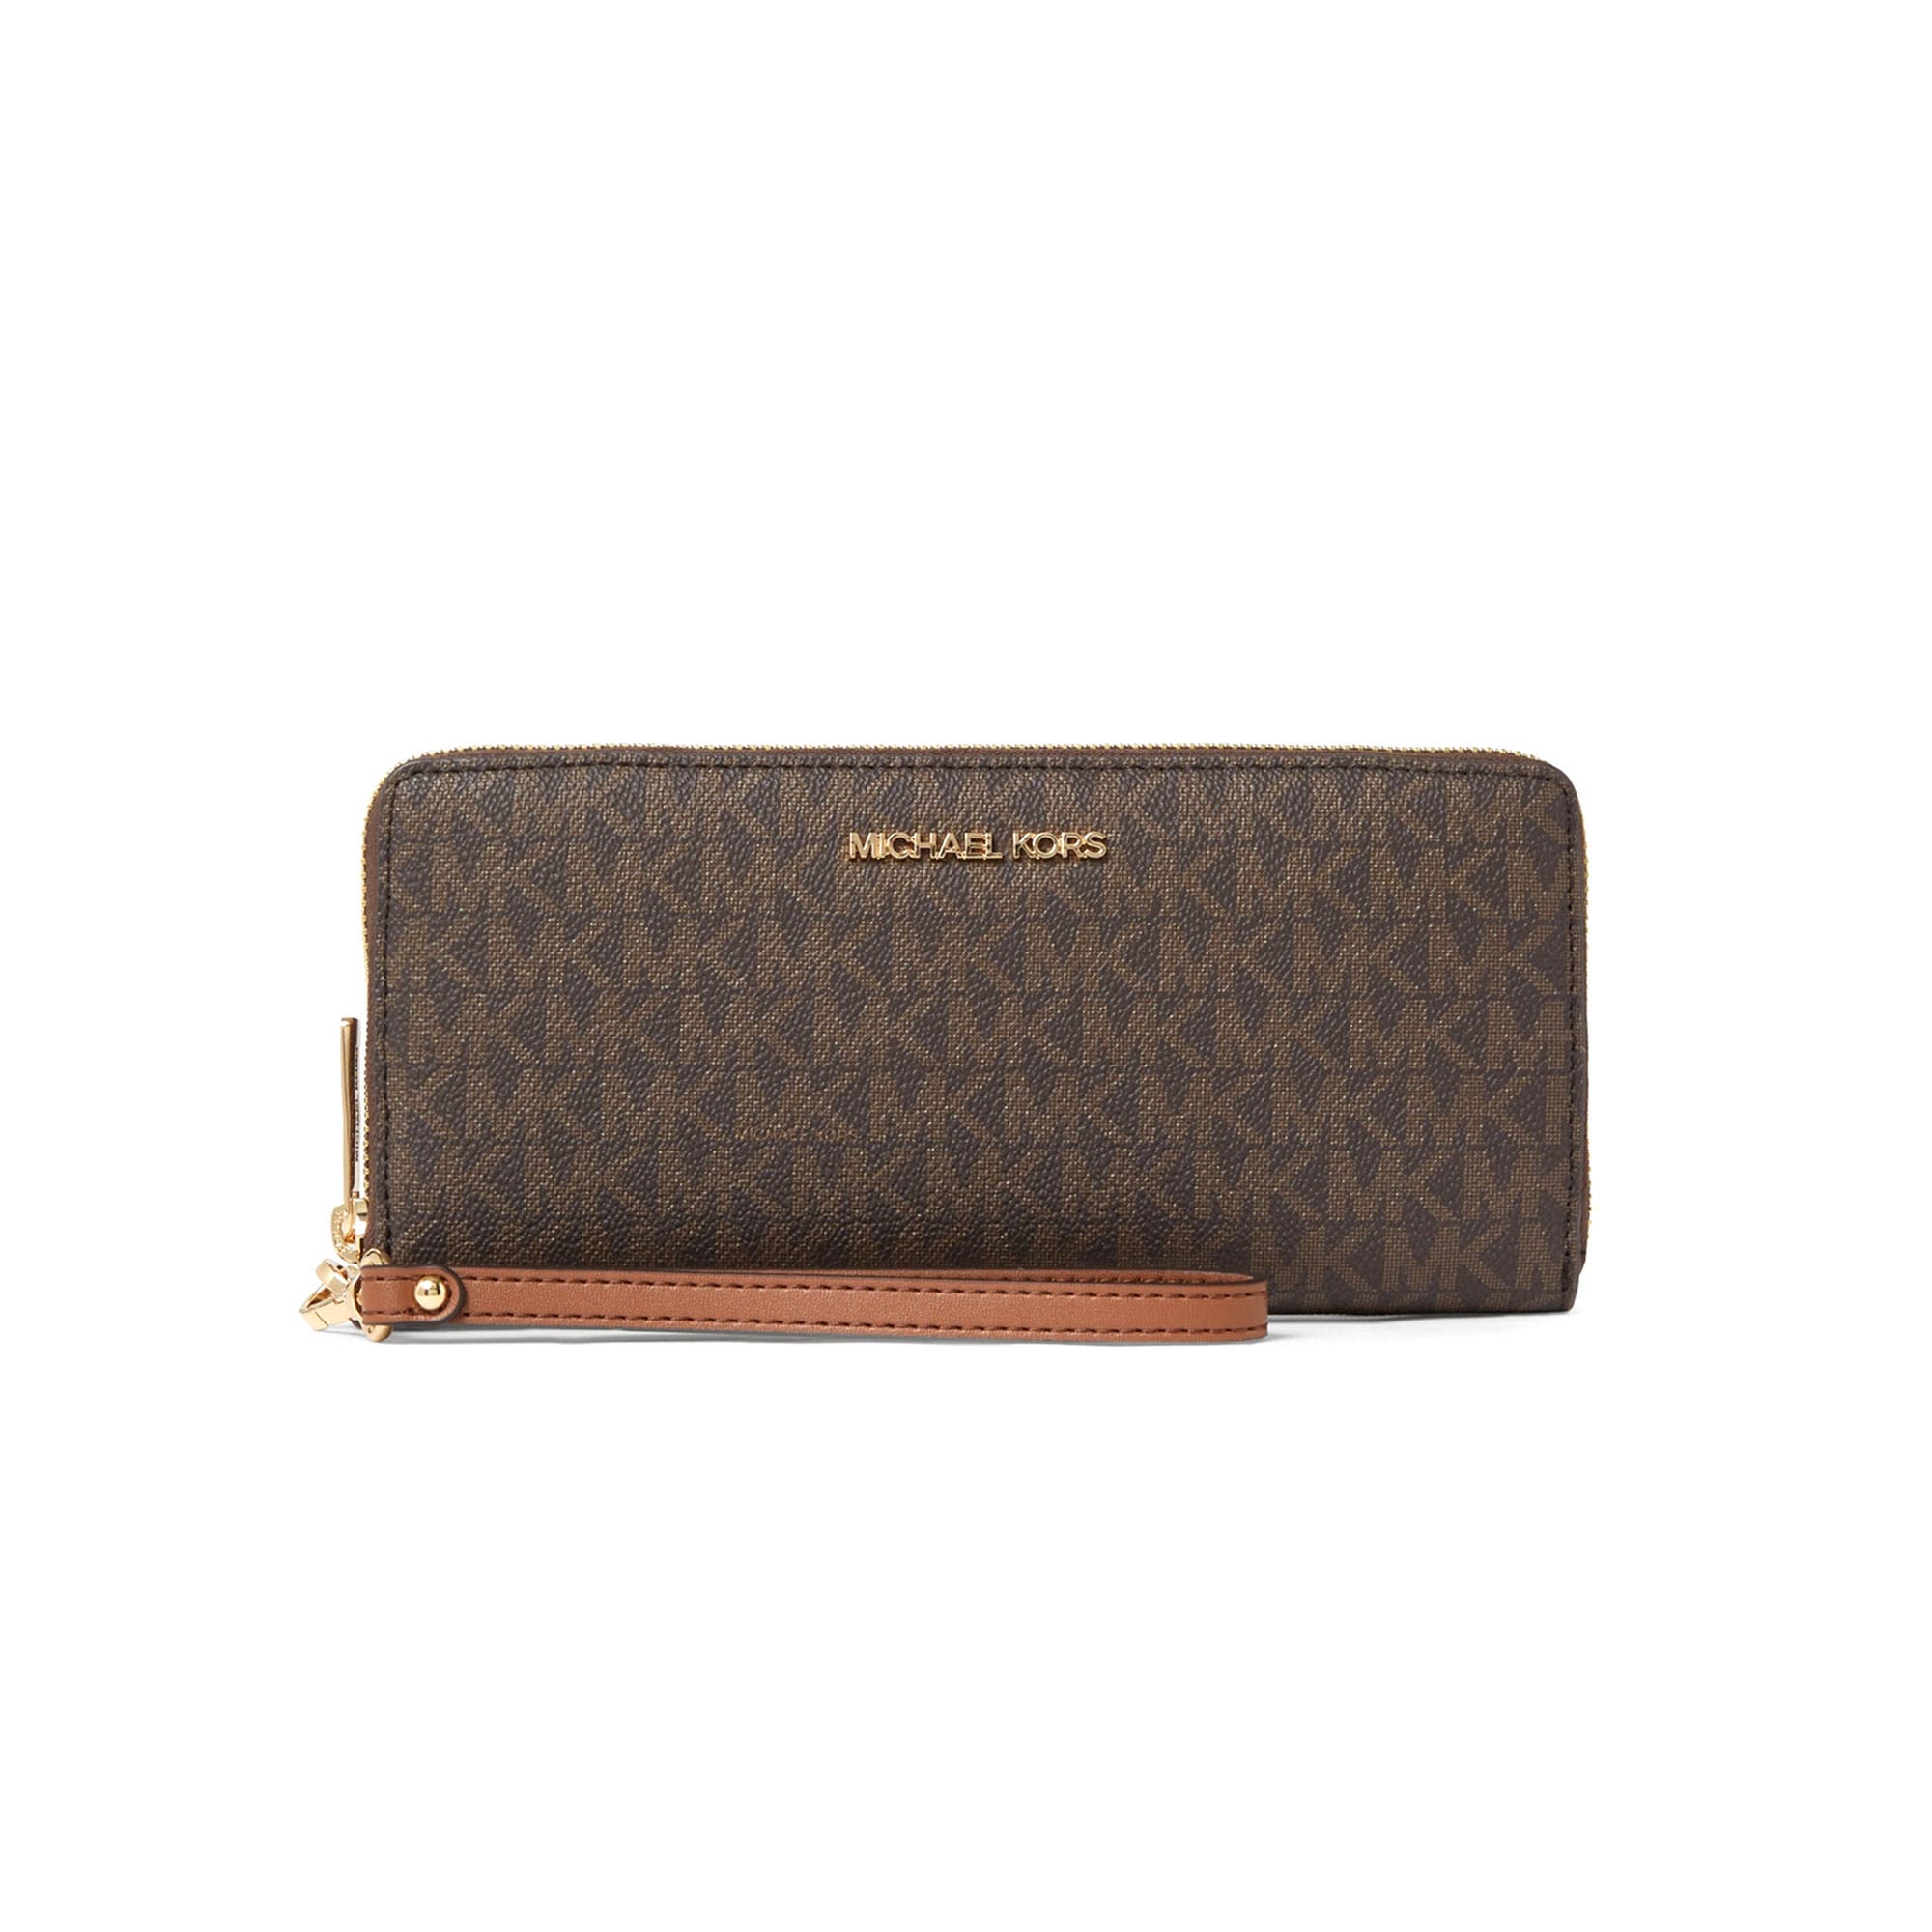 Gucci OUTLET in Germany » Sale up to 70% off